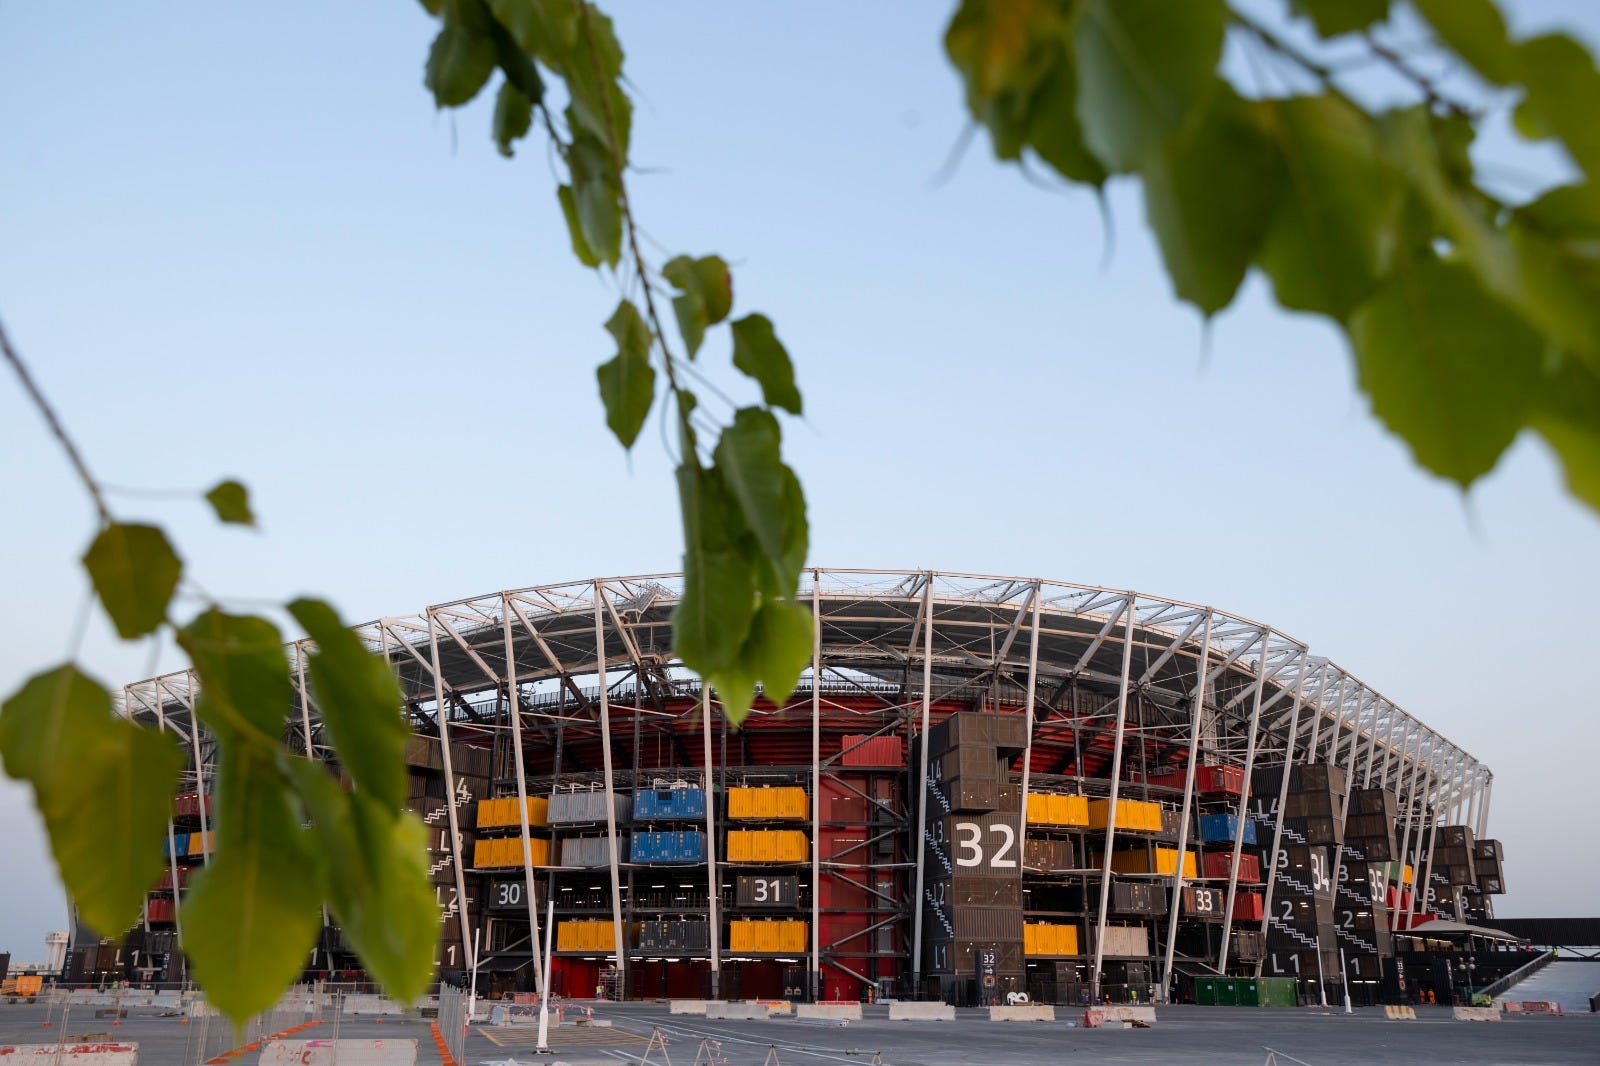 Stadium 974 is made of shipping containers